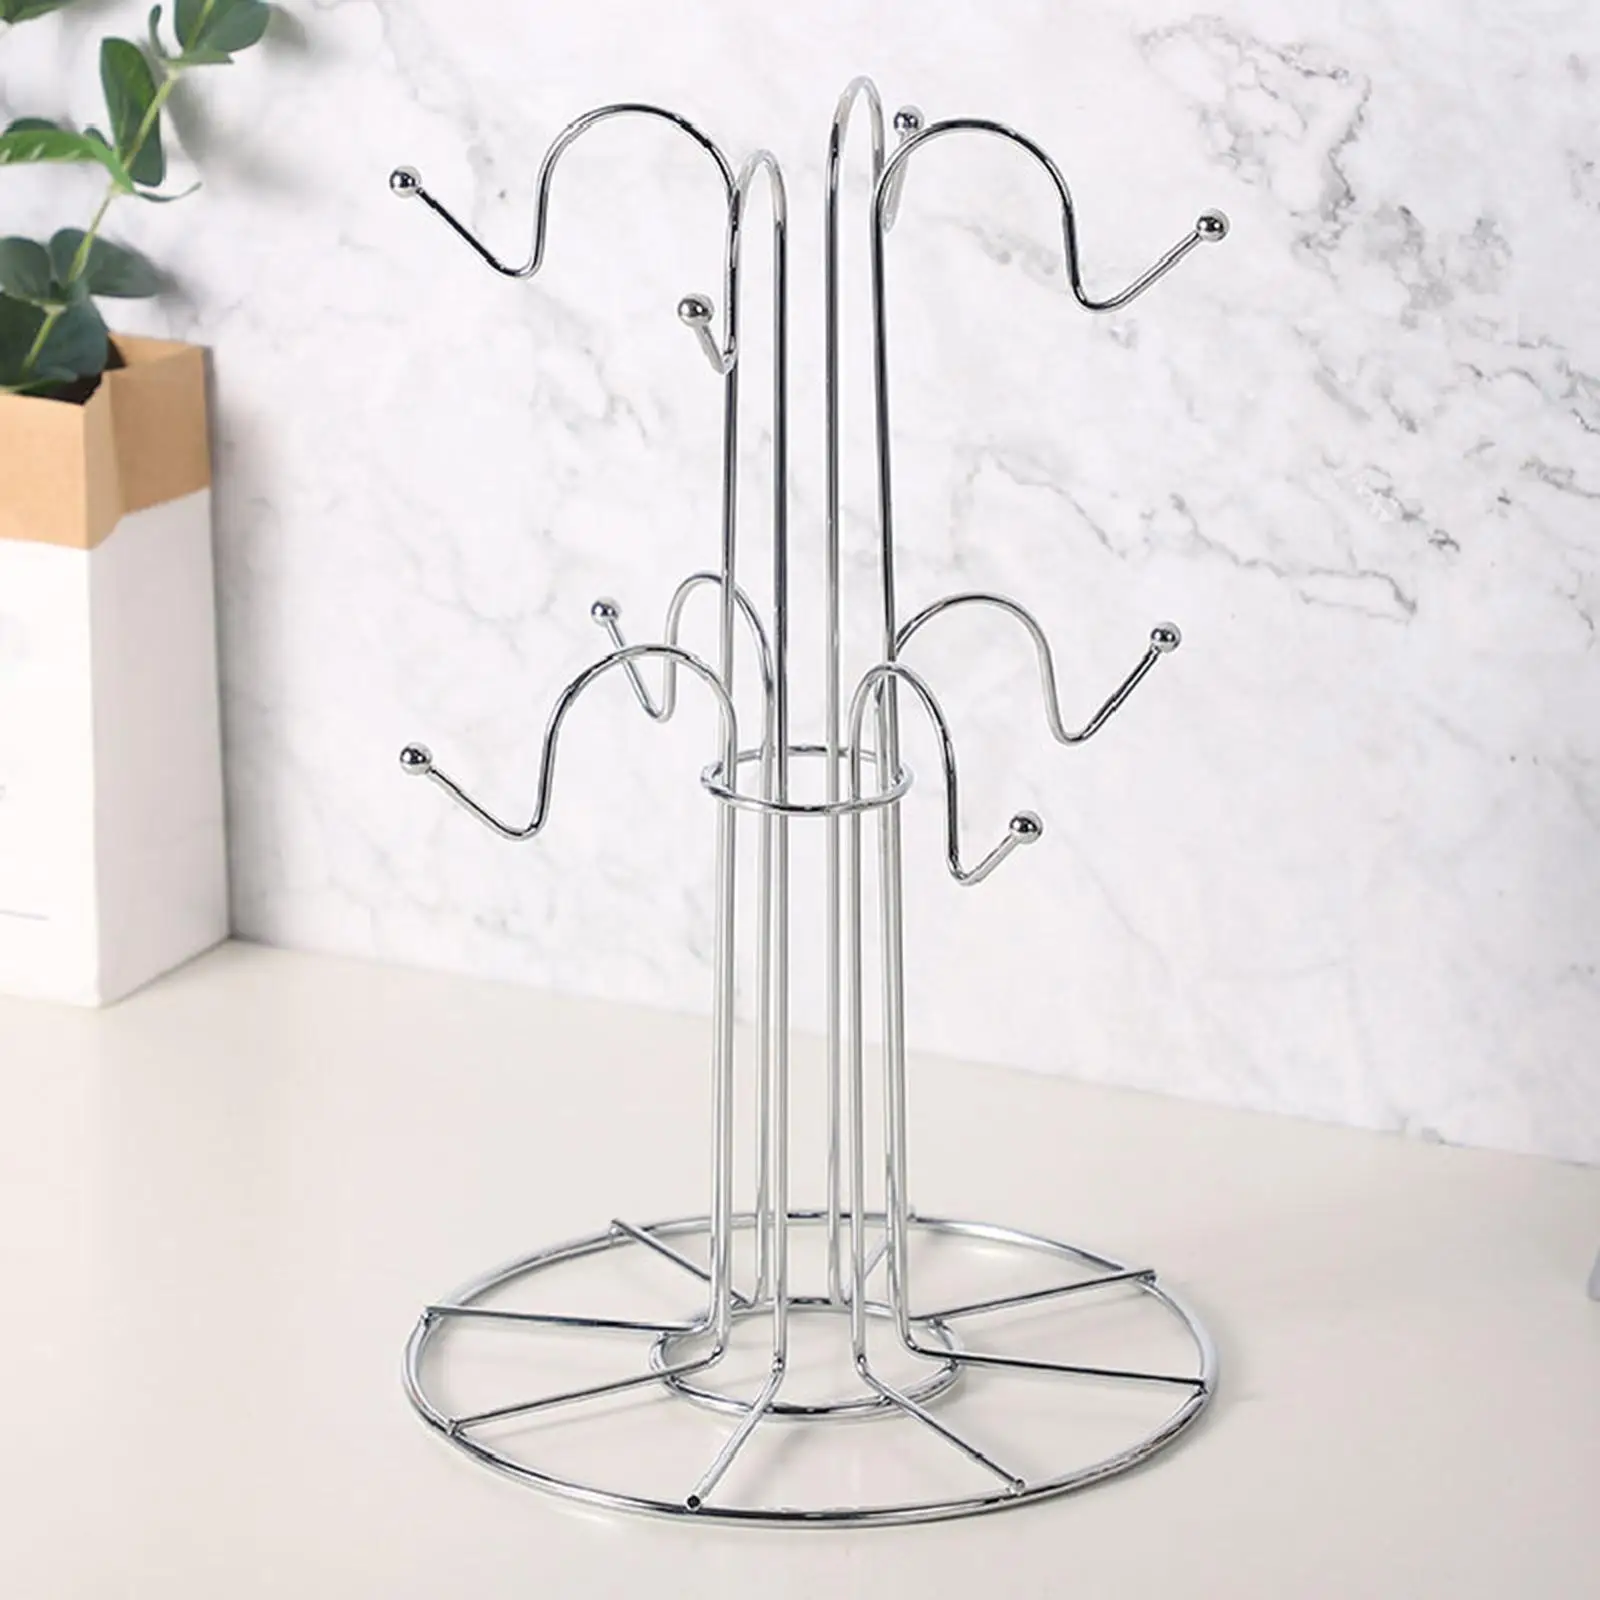 Cup Drying Rack with 8 Cup Hooks Drainer Tree Metal Stylish Stand for Home Countertop